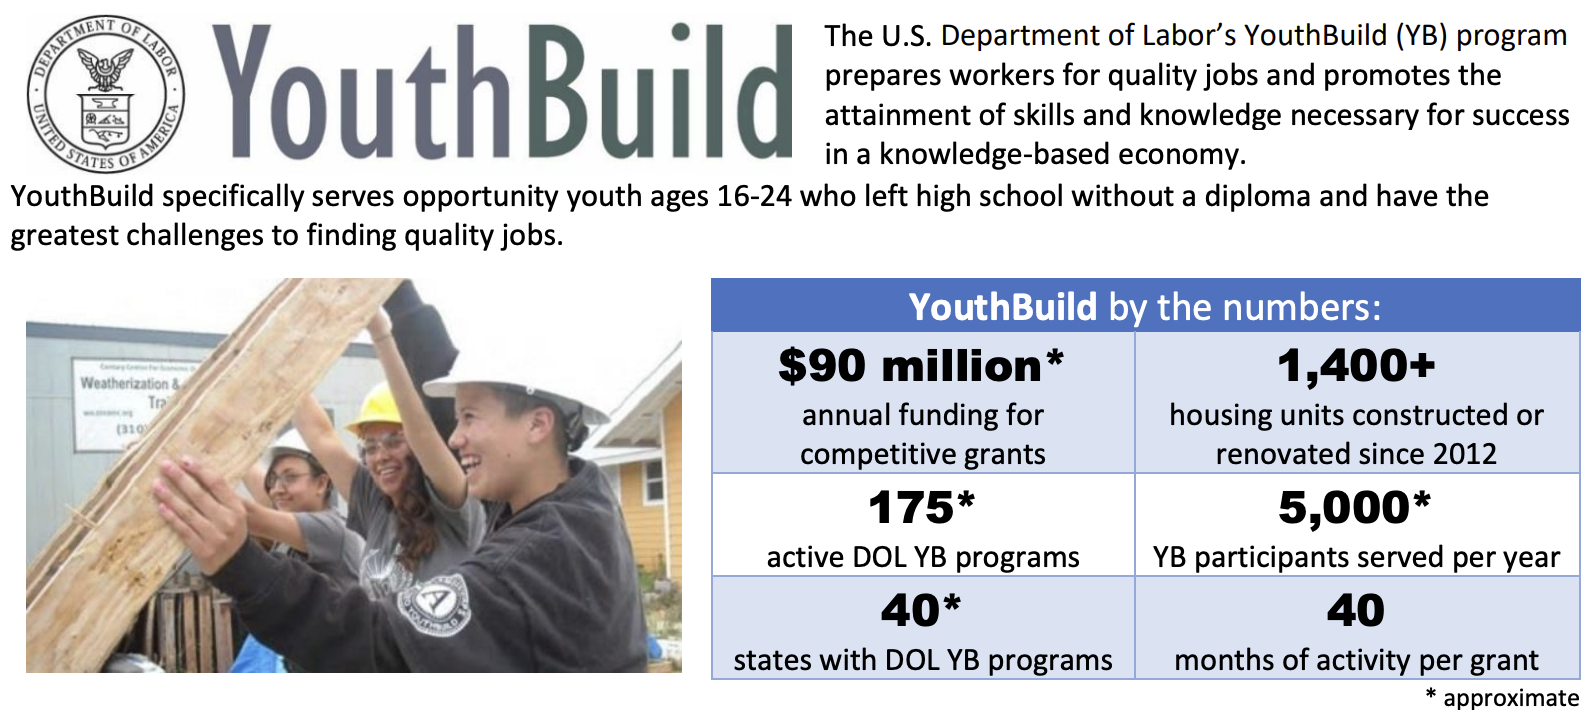 HAE was awarded a 1.5 Million YouthBuild Grant! Housing Authority of